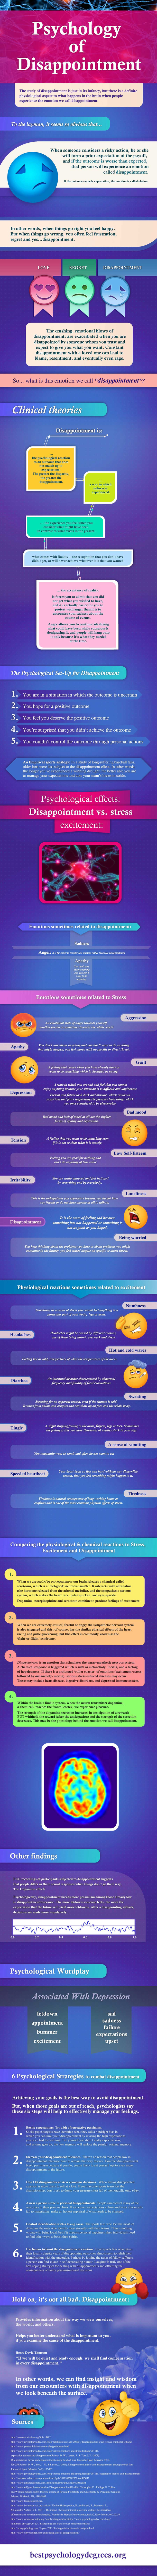 Dealing With Disappointment-Infographic